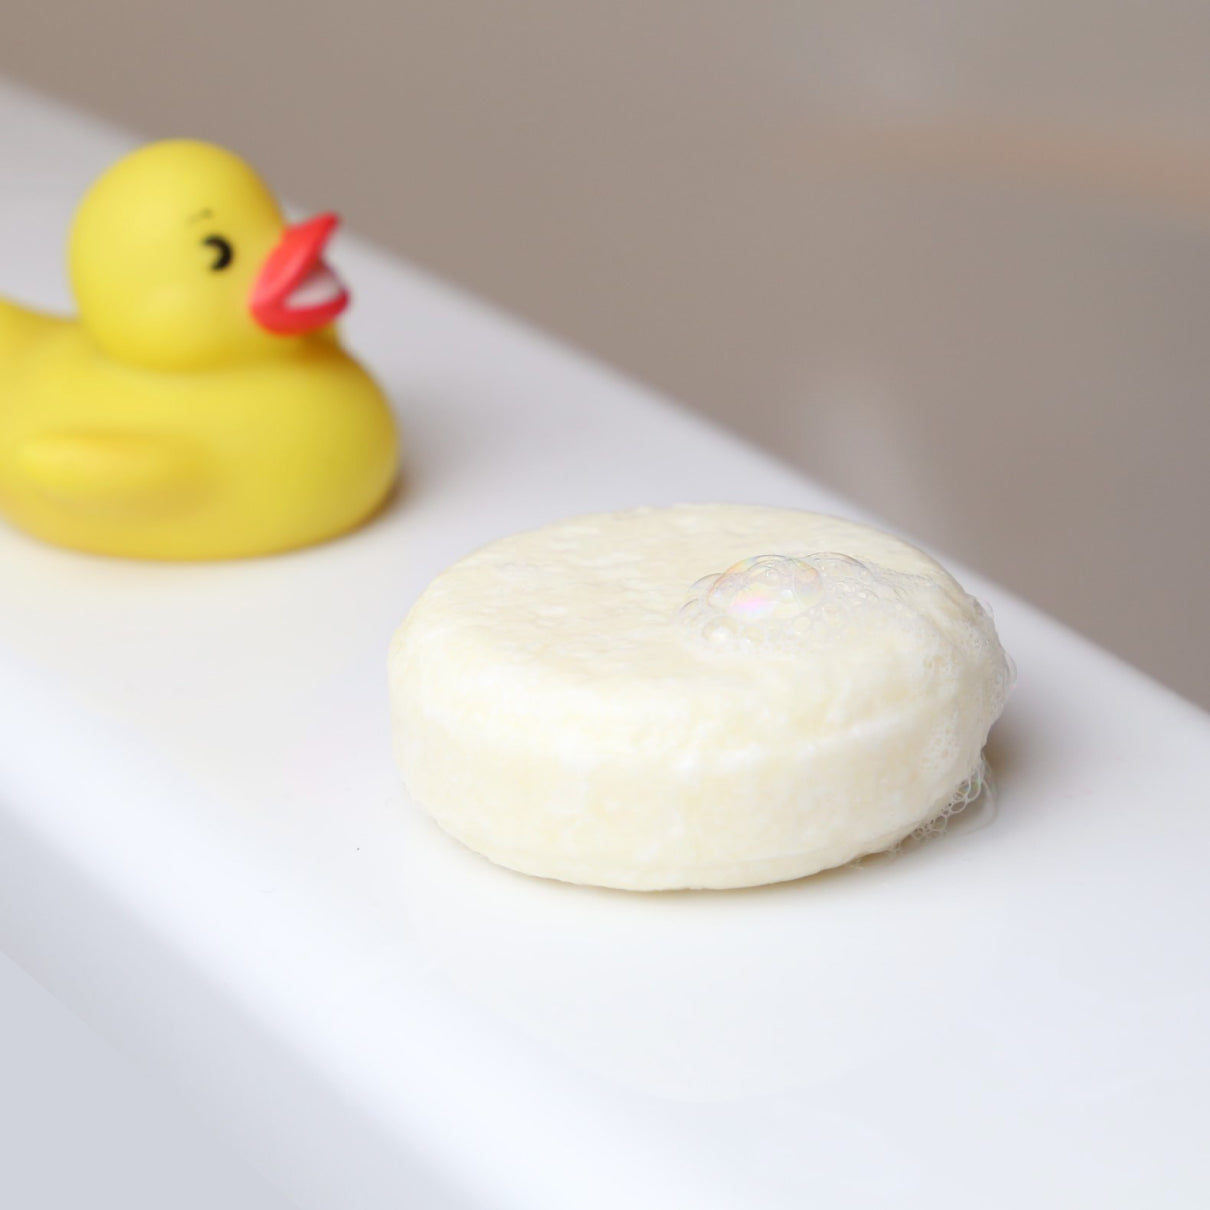 shampoo bar for baby and kids together with a play duck